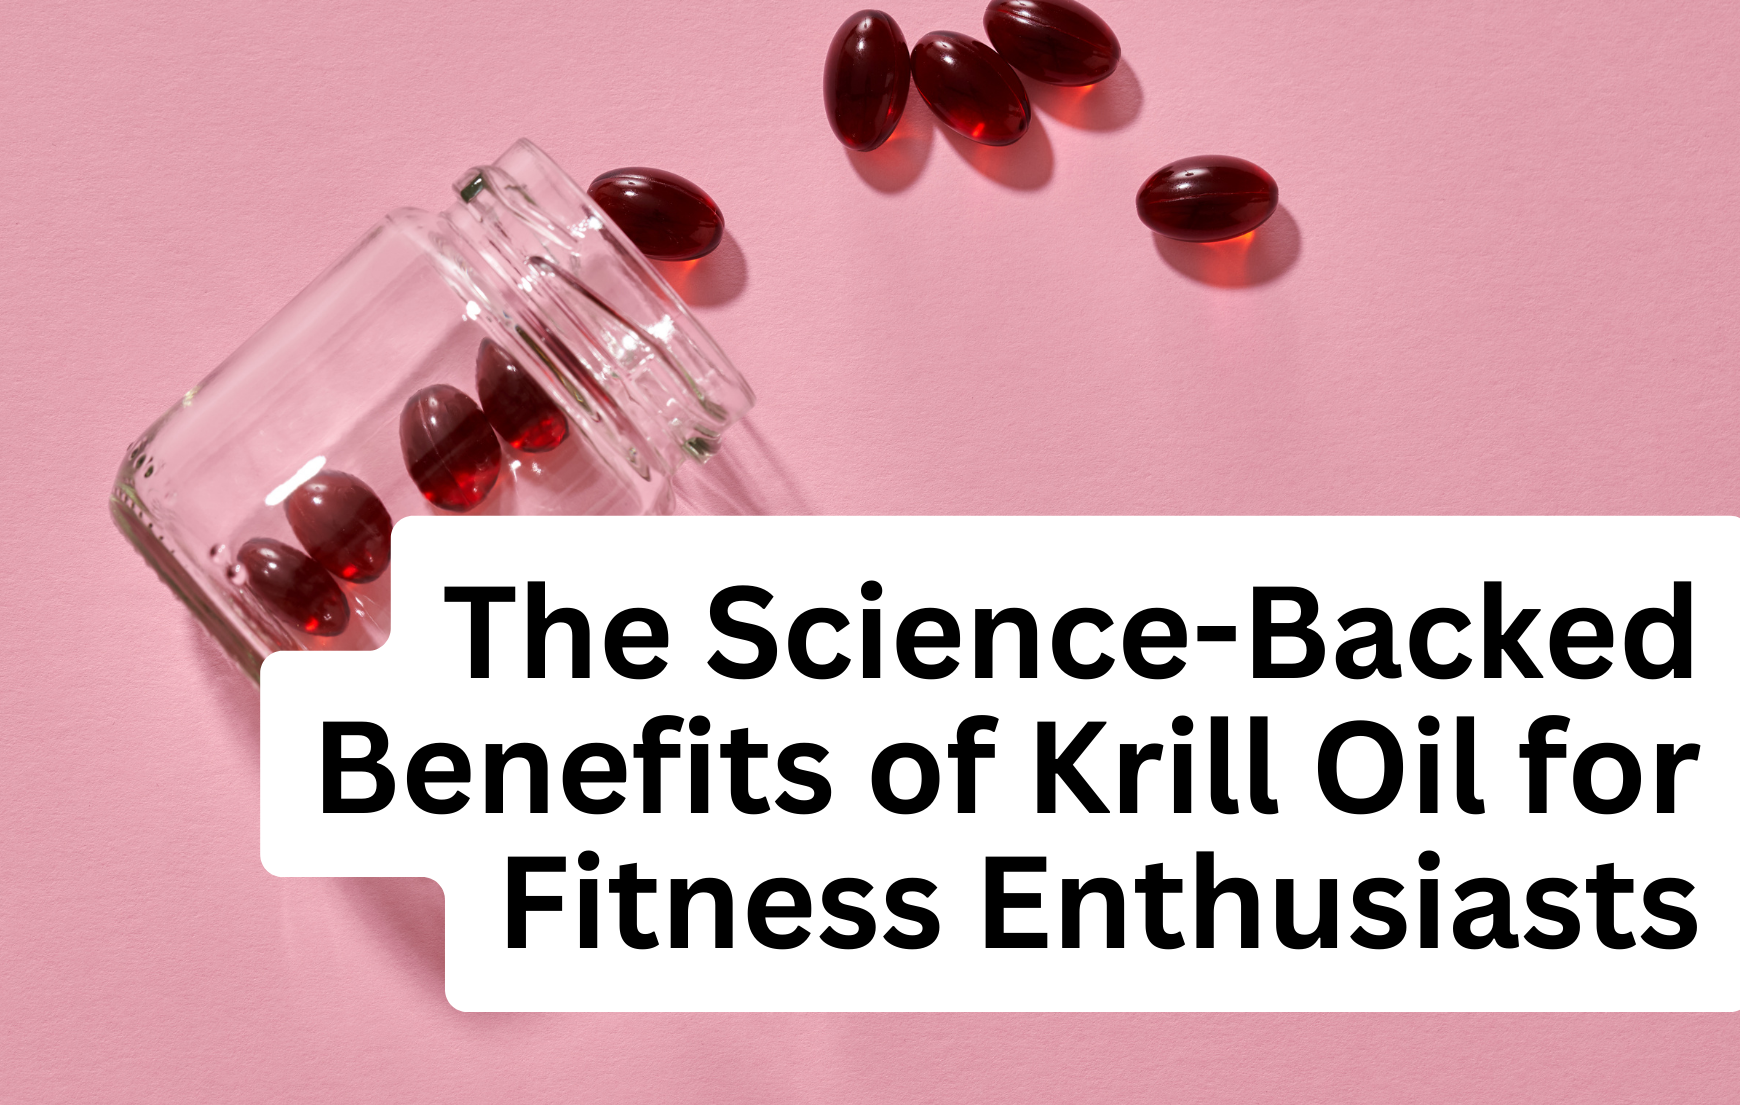 The Science-Backed Benefits of Krill Oil for Fitness Enthusiasts